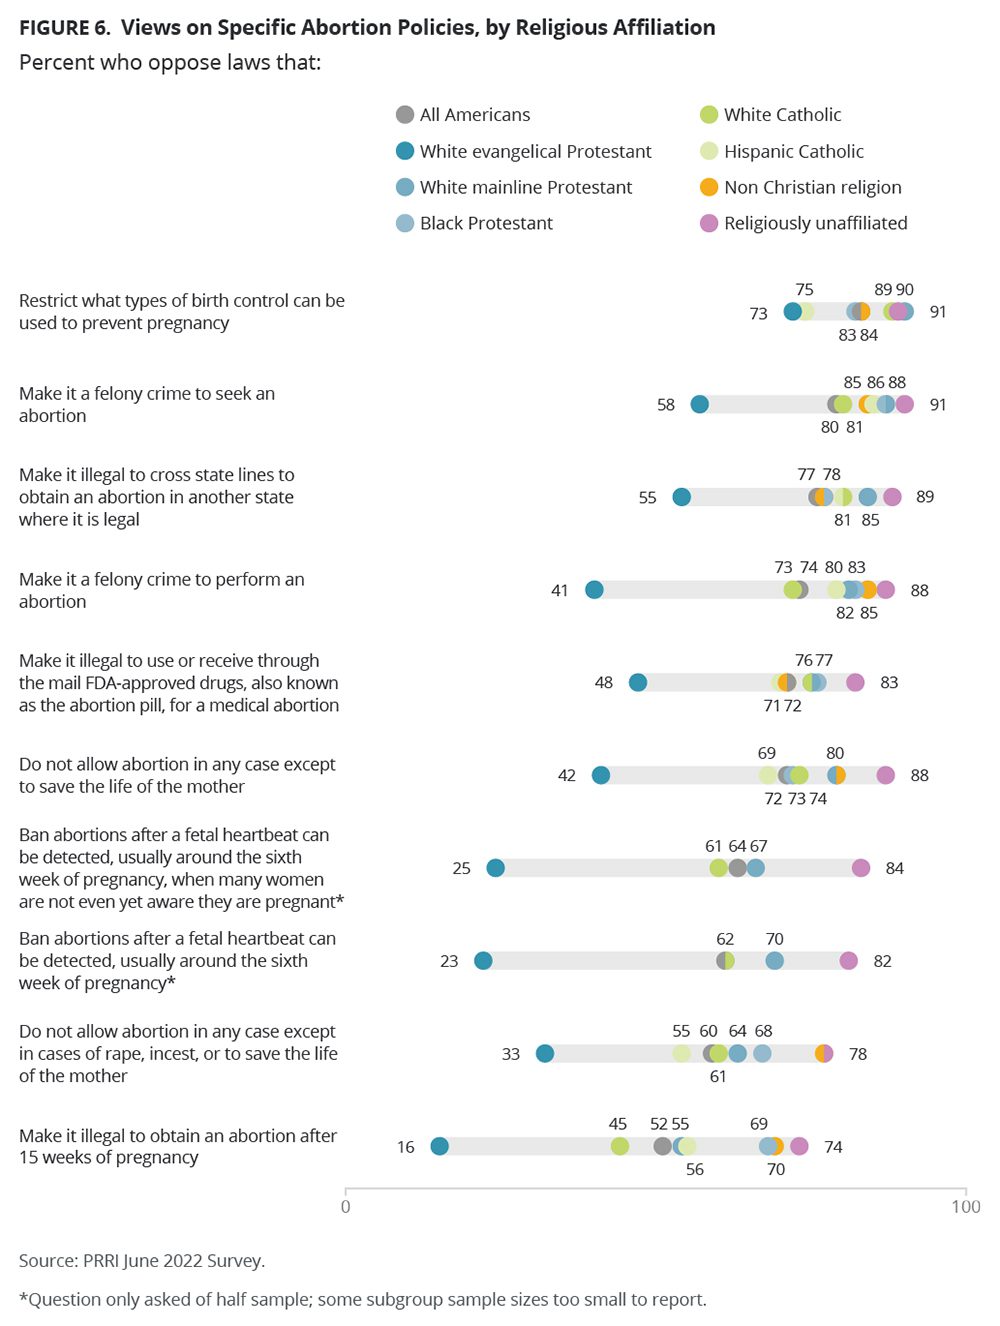 "Views on Specific Abortion Policies, by Religious Affiliation" Graphic courtesy of PRRI